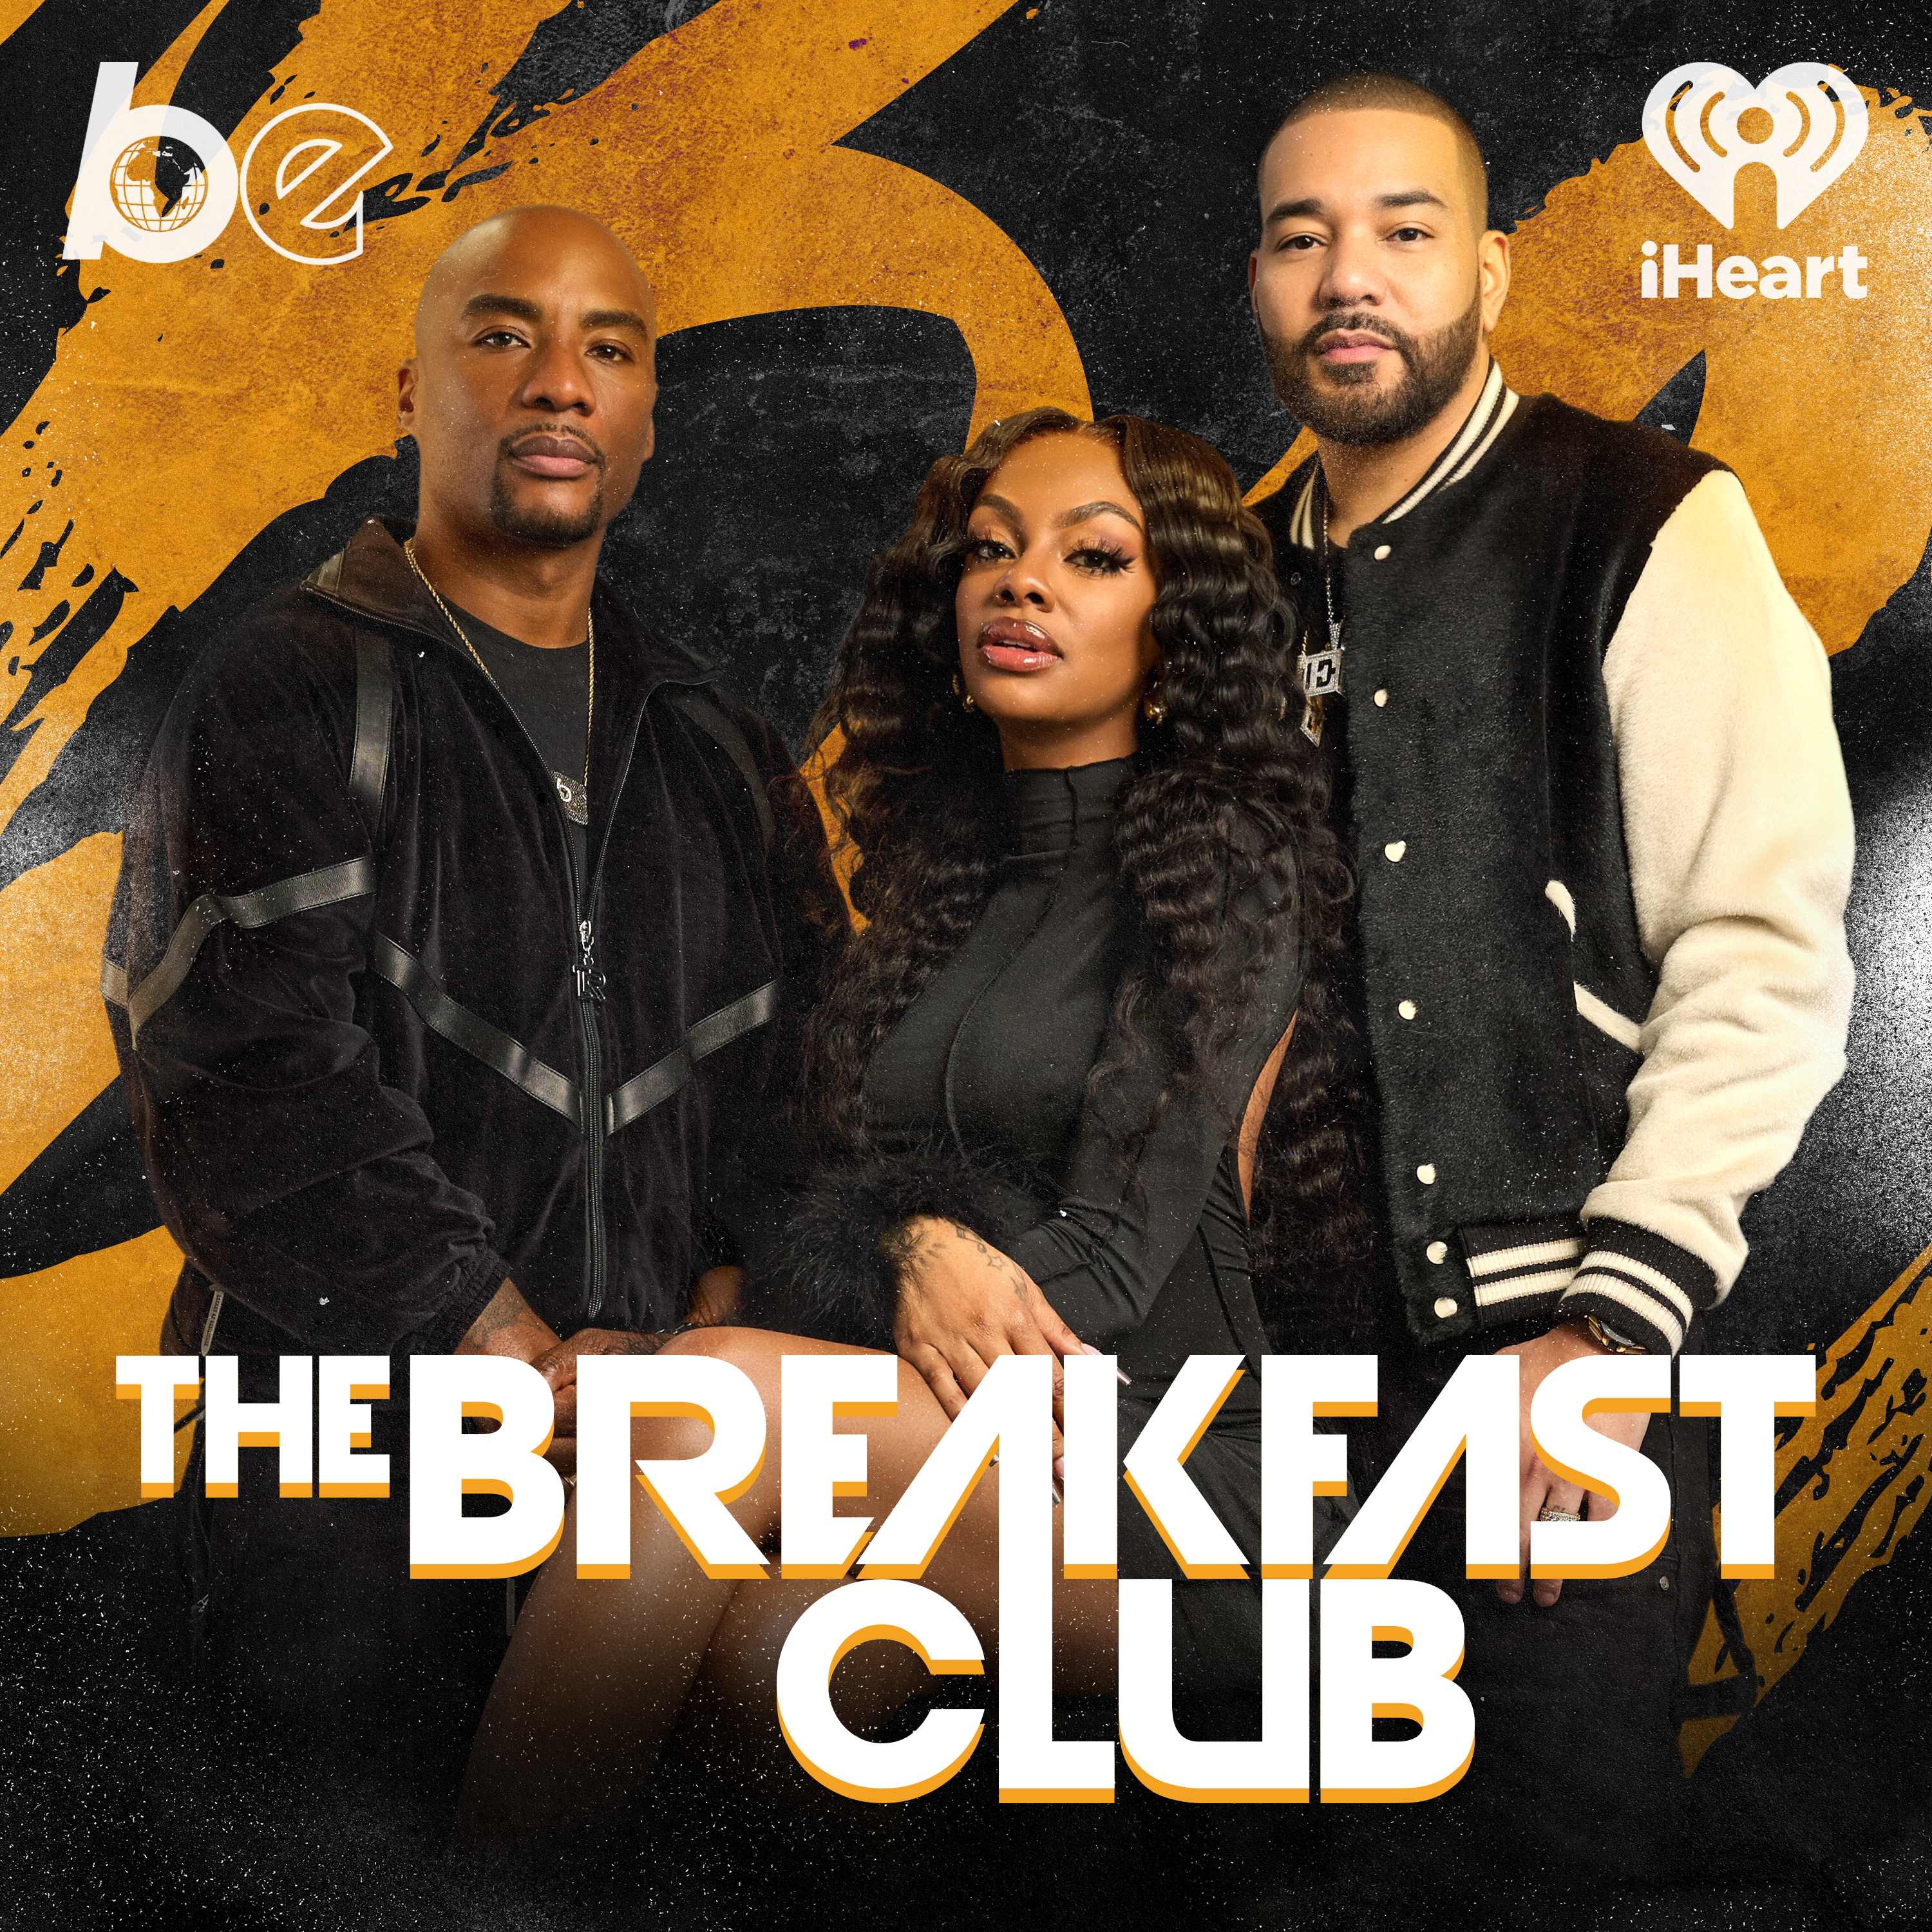 The Breakfast Club REWIND (Swizz Beatz Interview, Eboni K. Williams Interview, Joe Clair Interview, Should You Look For Love And Not Wealth?)